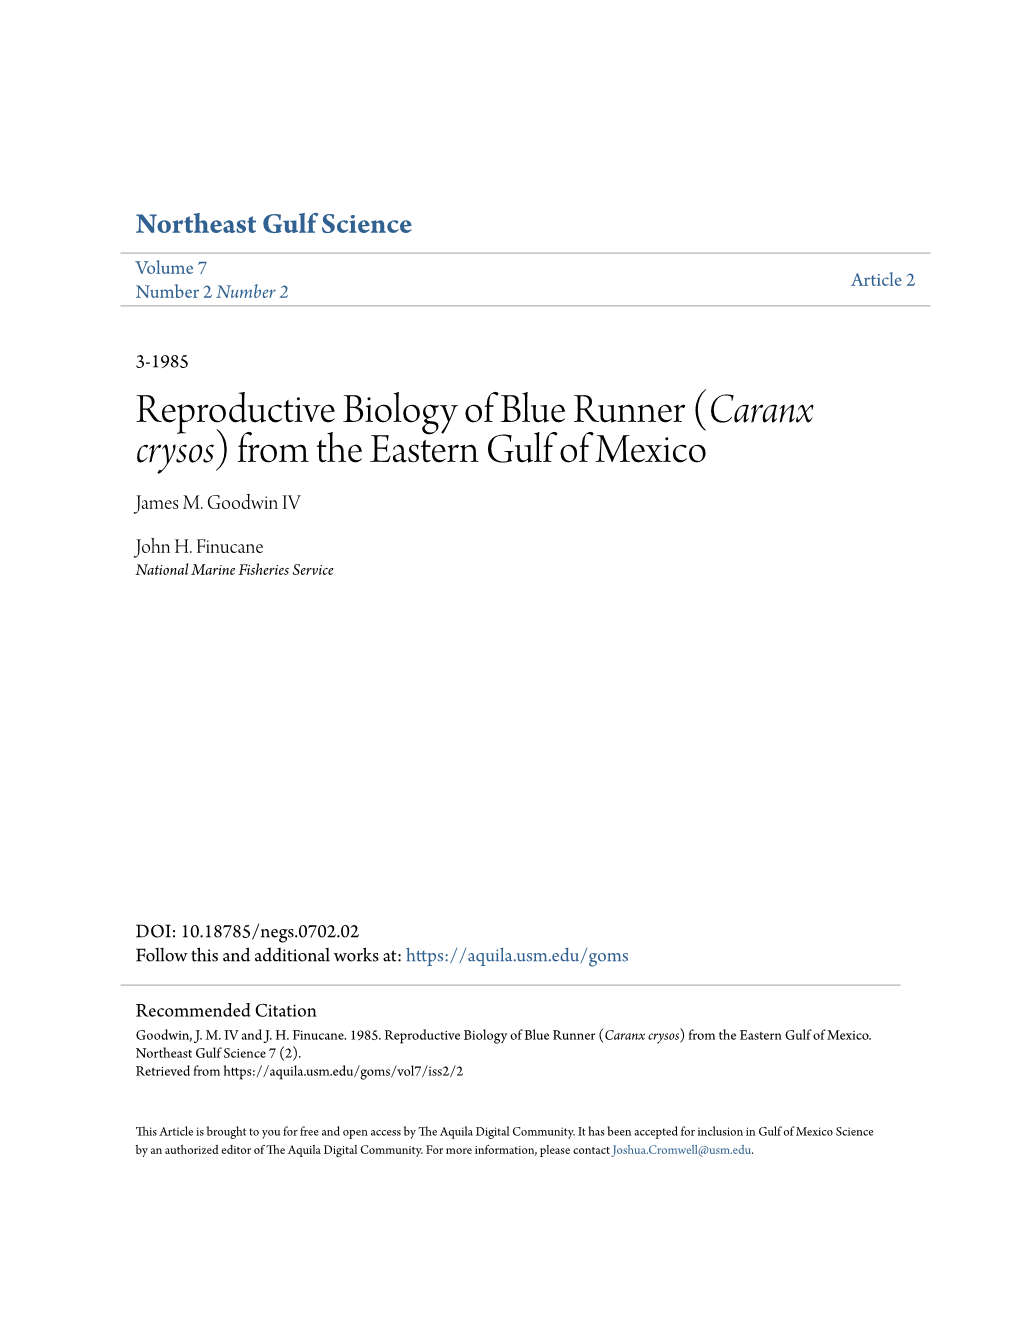 Reproductive Biology of Blue Runner (Caranx Crysos) from the Eastern Gulf of Mexico James M